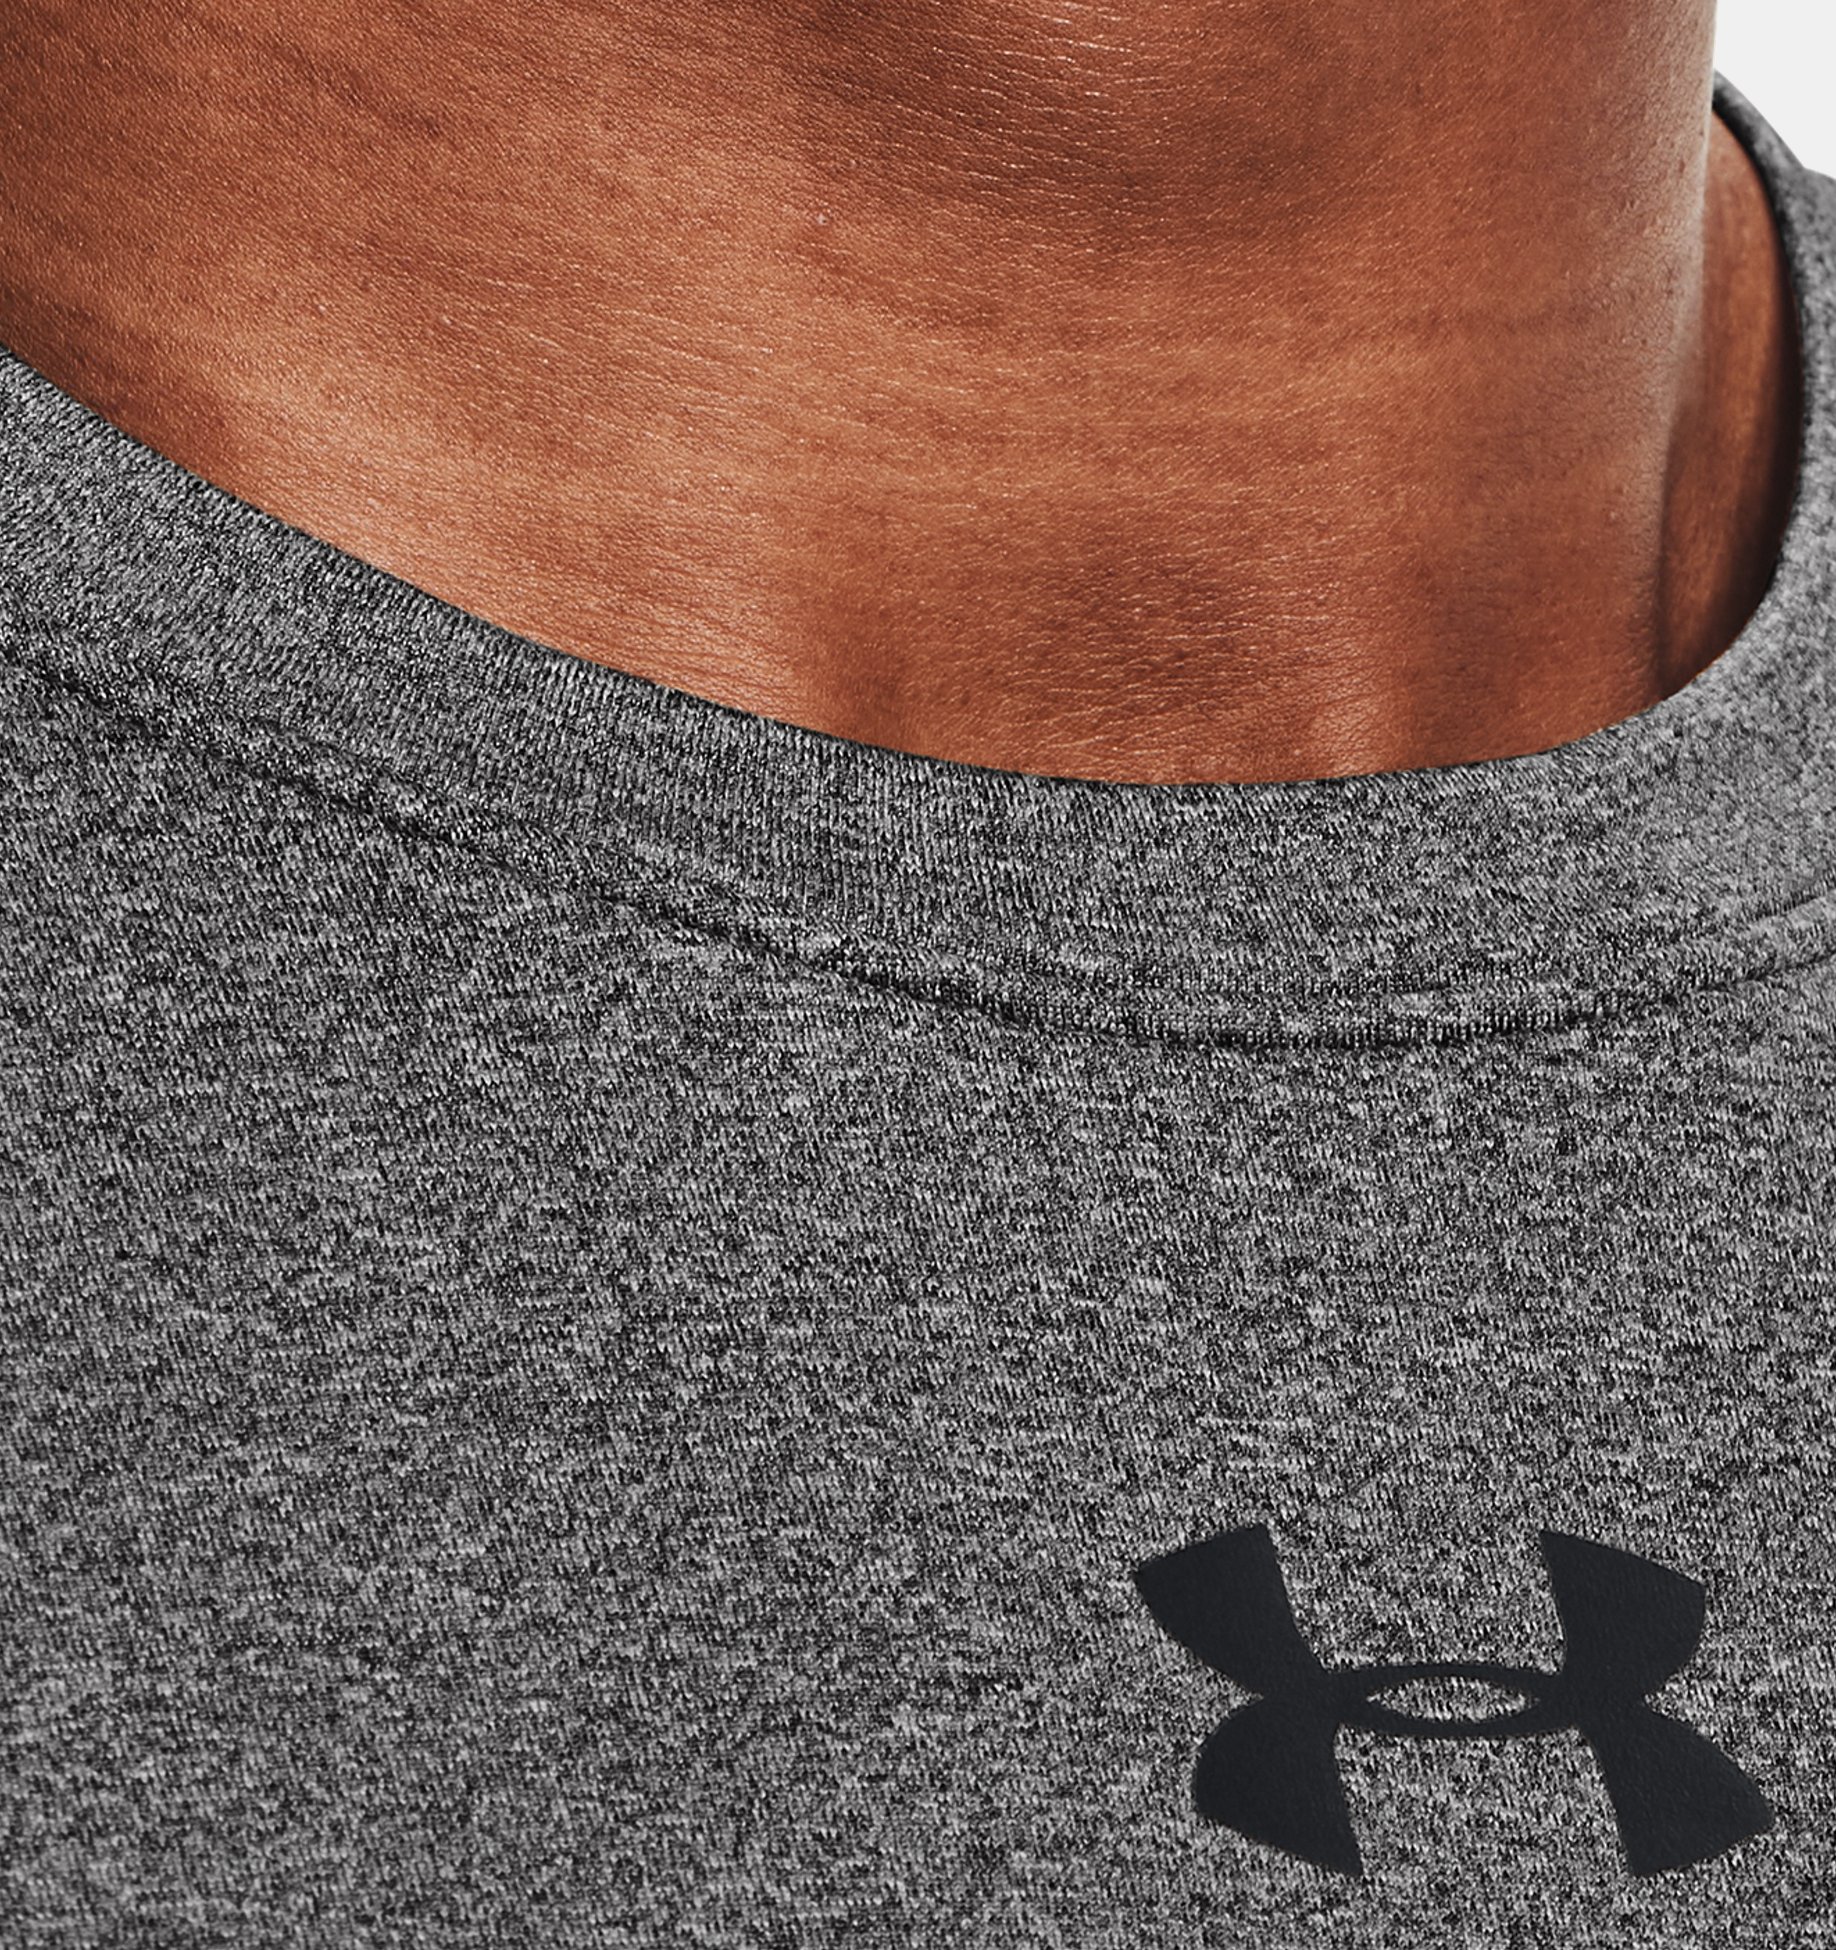 Hasta Traer pompa Men's ColdGear® Armour Fitted Crew | Under Armour